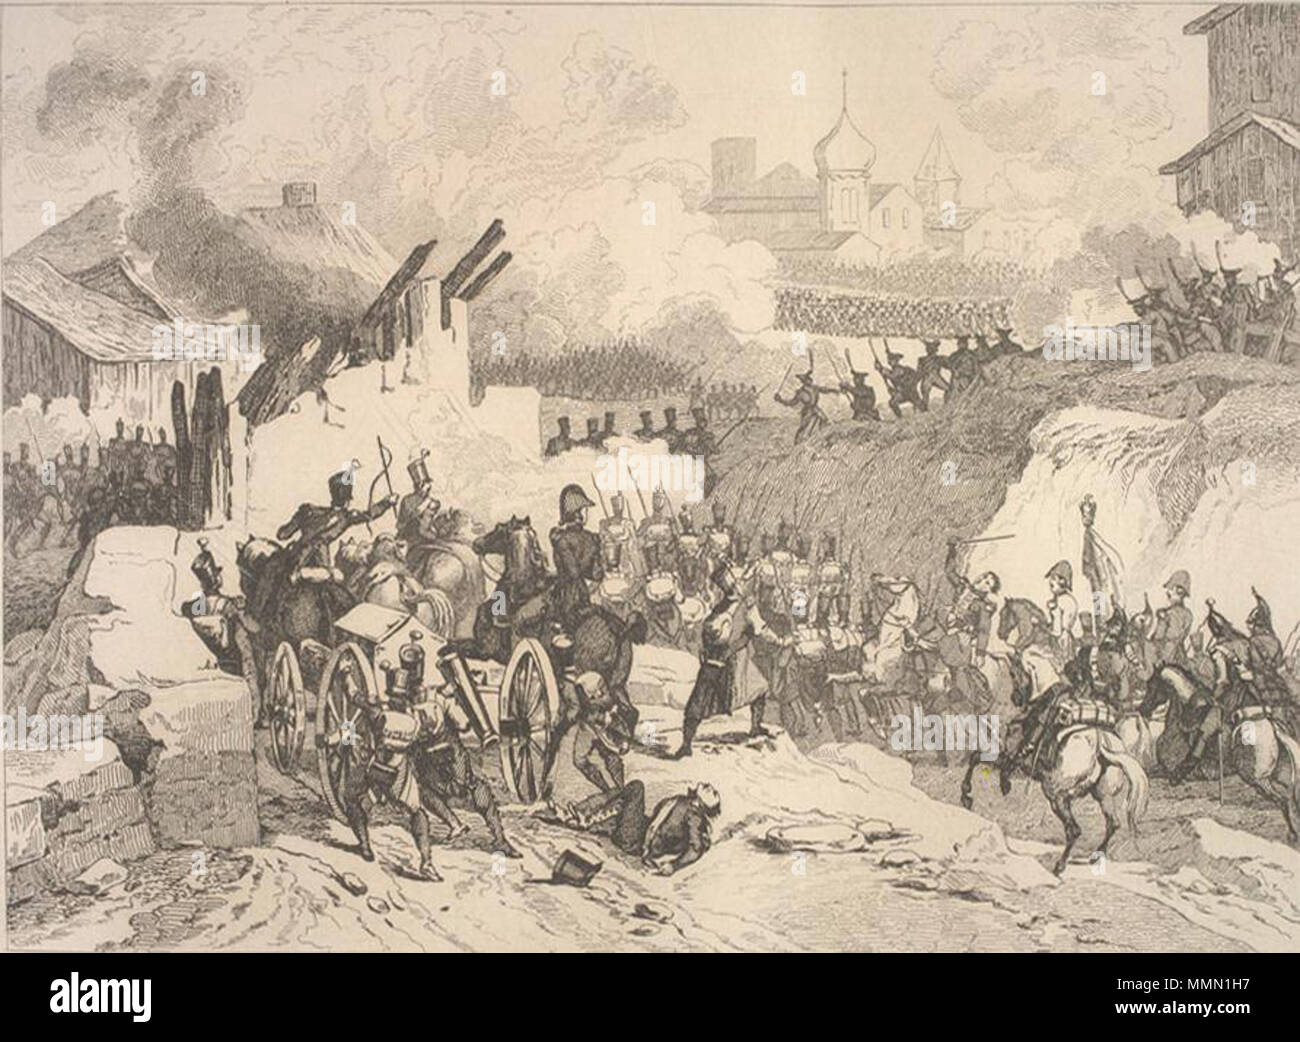 . Battle between Russian and French troops for Maloyaroslavets (Russia) on October, 24, part of the 1812 Napoleon Russian campaign. Title to drawing: Battle of Malo-jaroslawetz. [and] Death of General Delzons. From FRANCE MILITAIRE. // Martinet delt. // Réville sculpt // T.  . 19th century. artists: del. MARTINET, sc. RÉVILLE, Jean-Baptiste (1767-1825) 75 Battle of Maloyaroslavets 1812 by Martinet Stock Photo